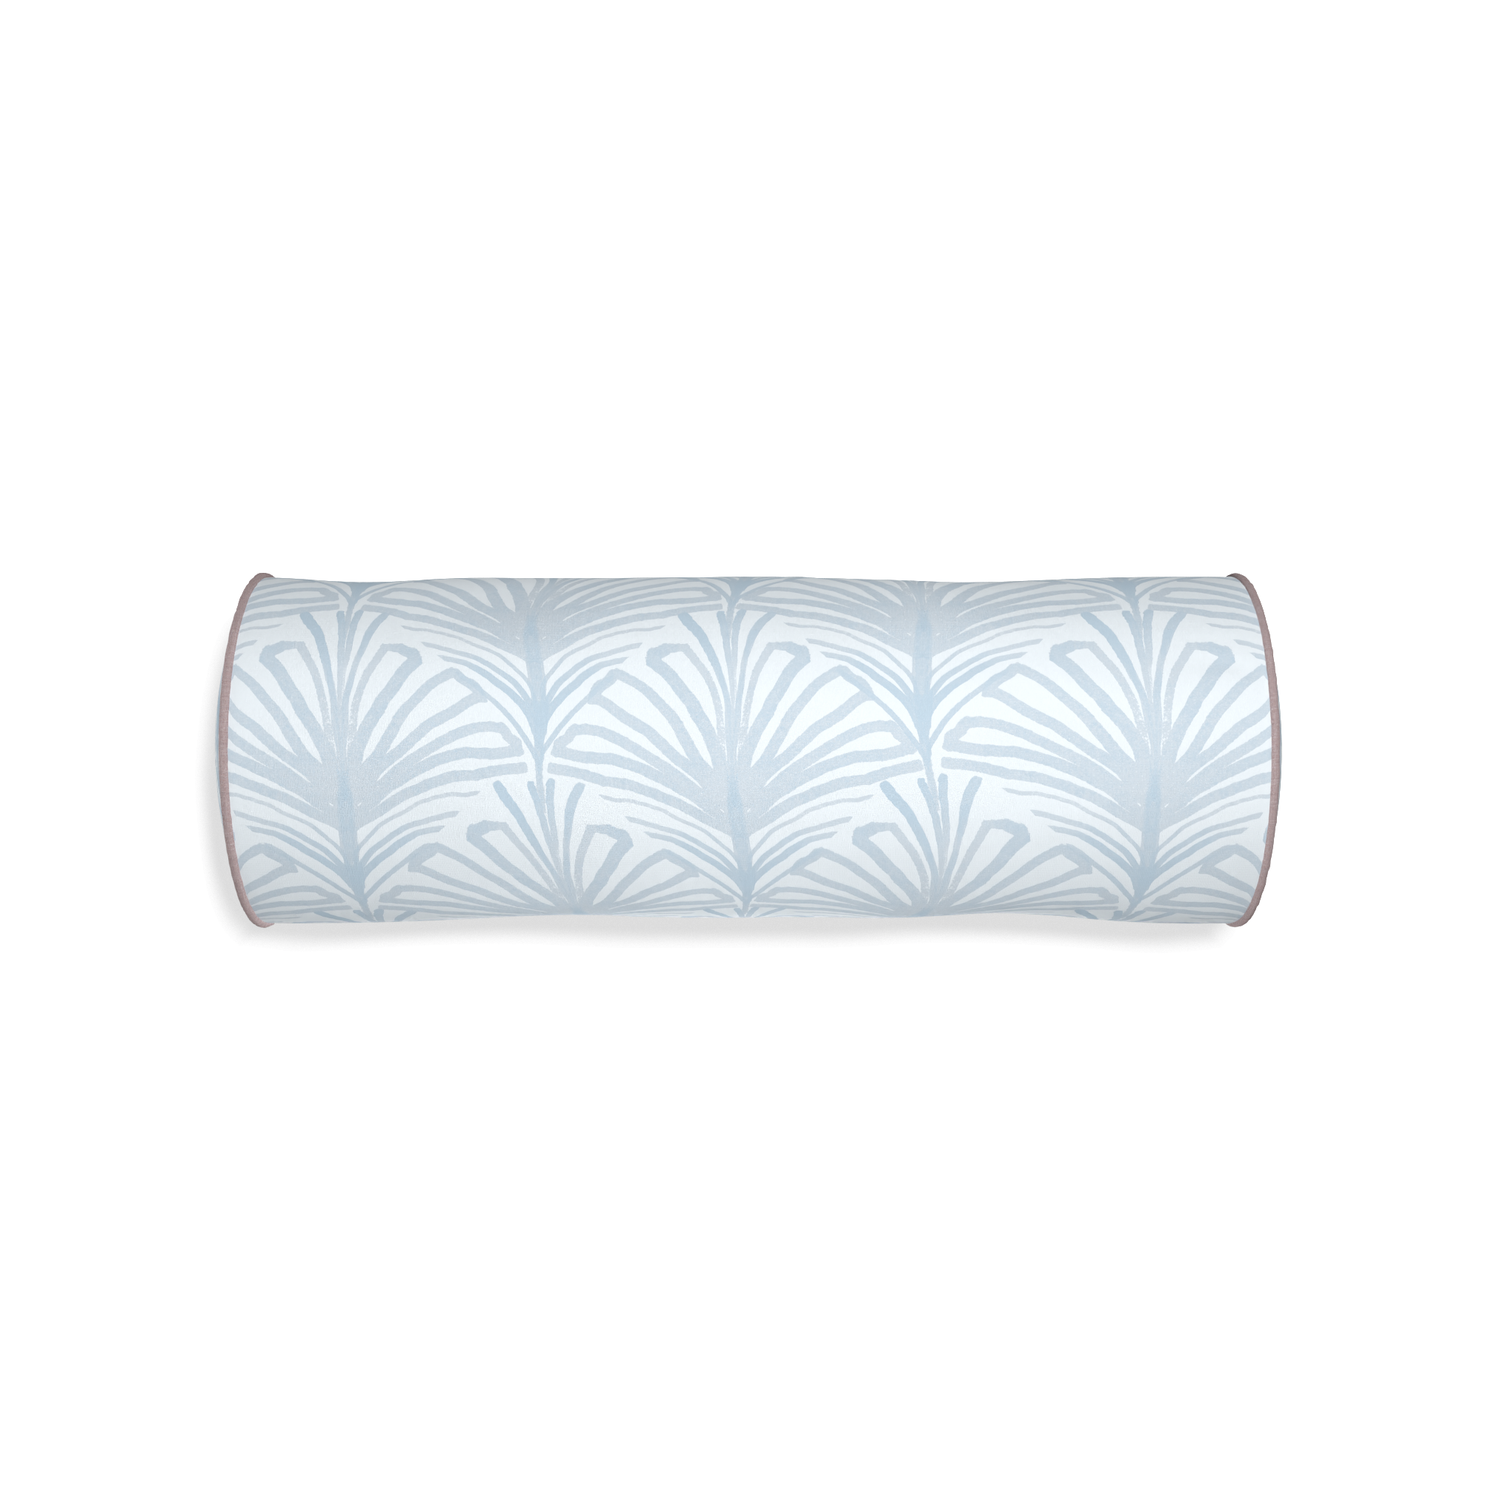 Bolster suzy sky custom sky blue palmpillow with orchid piping on white background